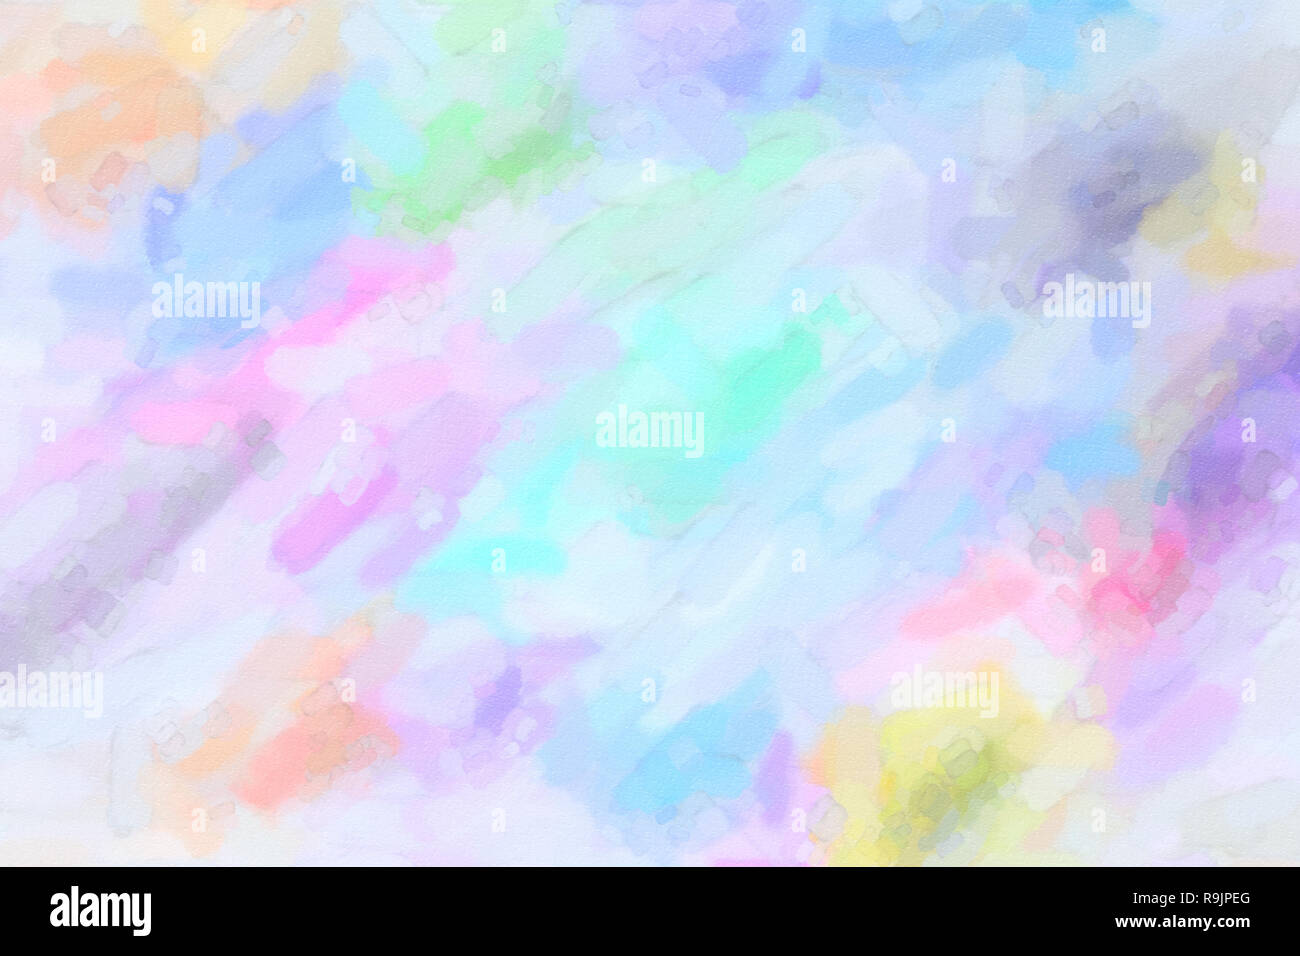 Multicolored watercolor gradient background. Colorful digital illustration simulating true watercolor with paper texture. Stock Photo